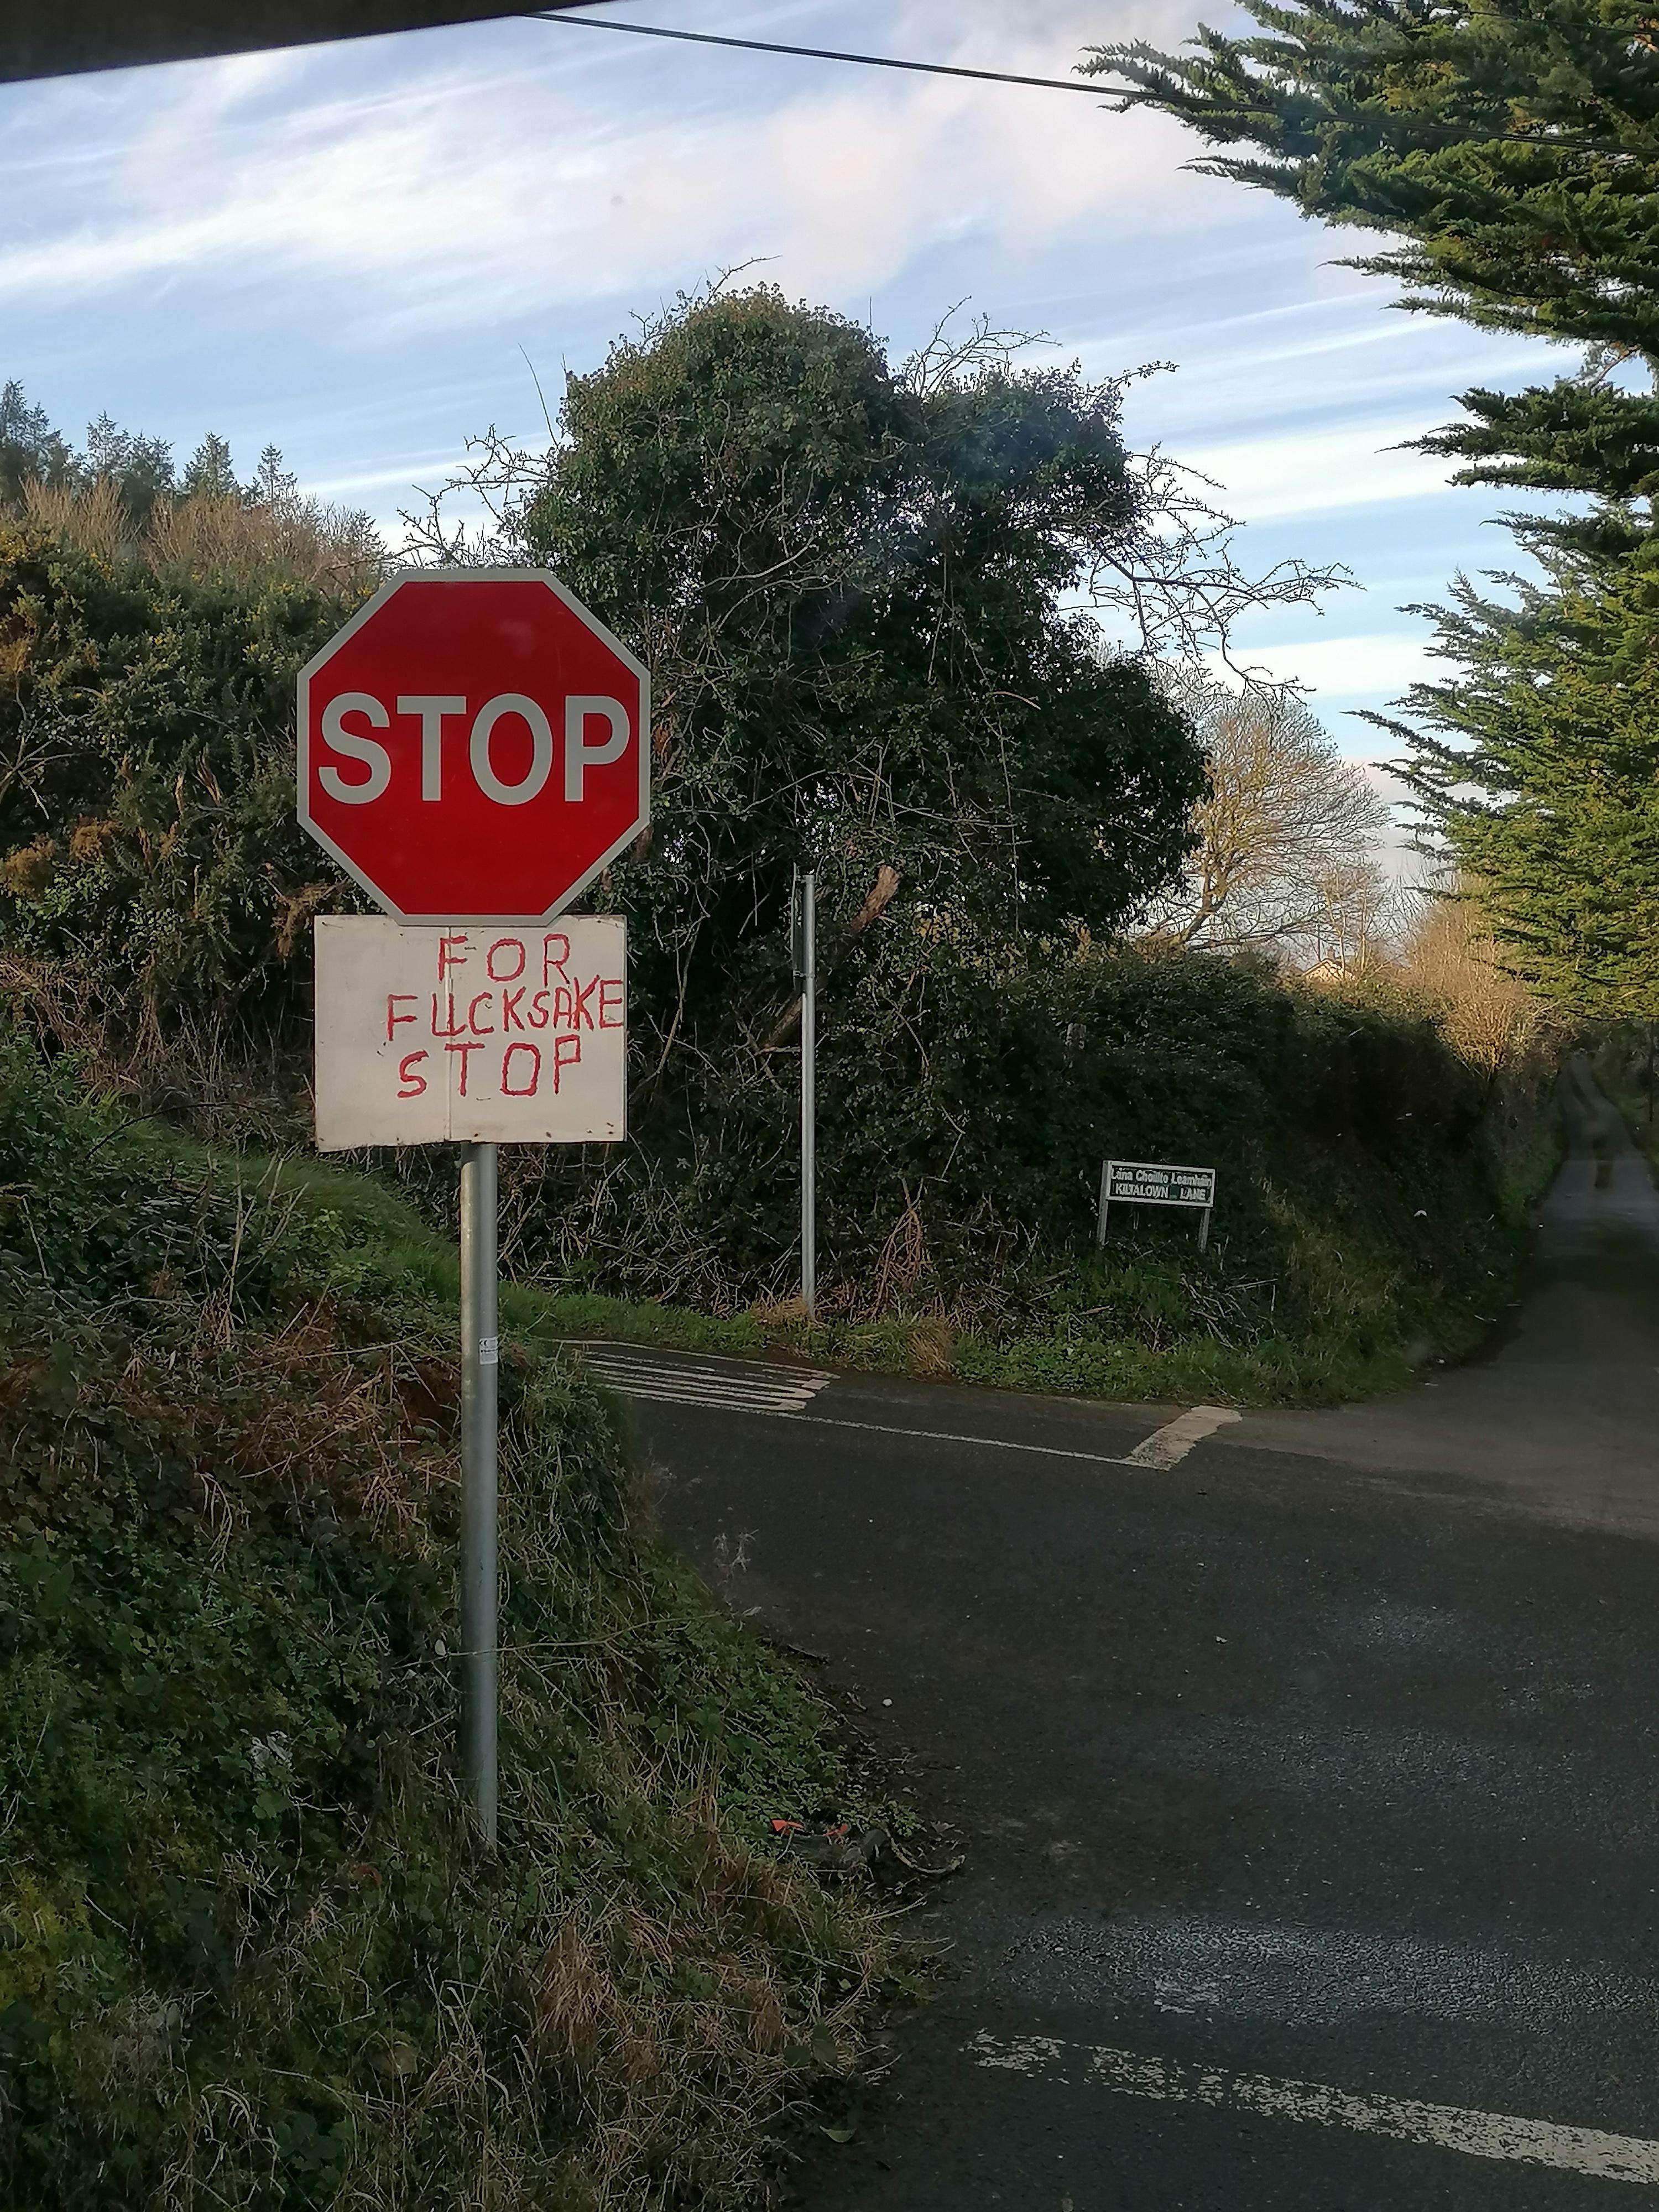 image showing This stop sign I found in a rural part of Ireland from fed up locals